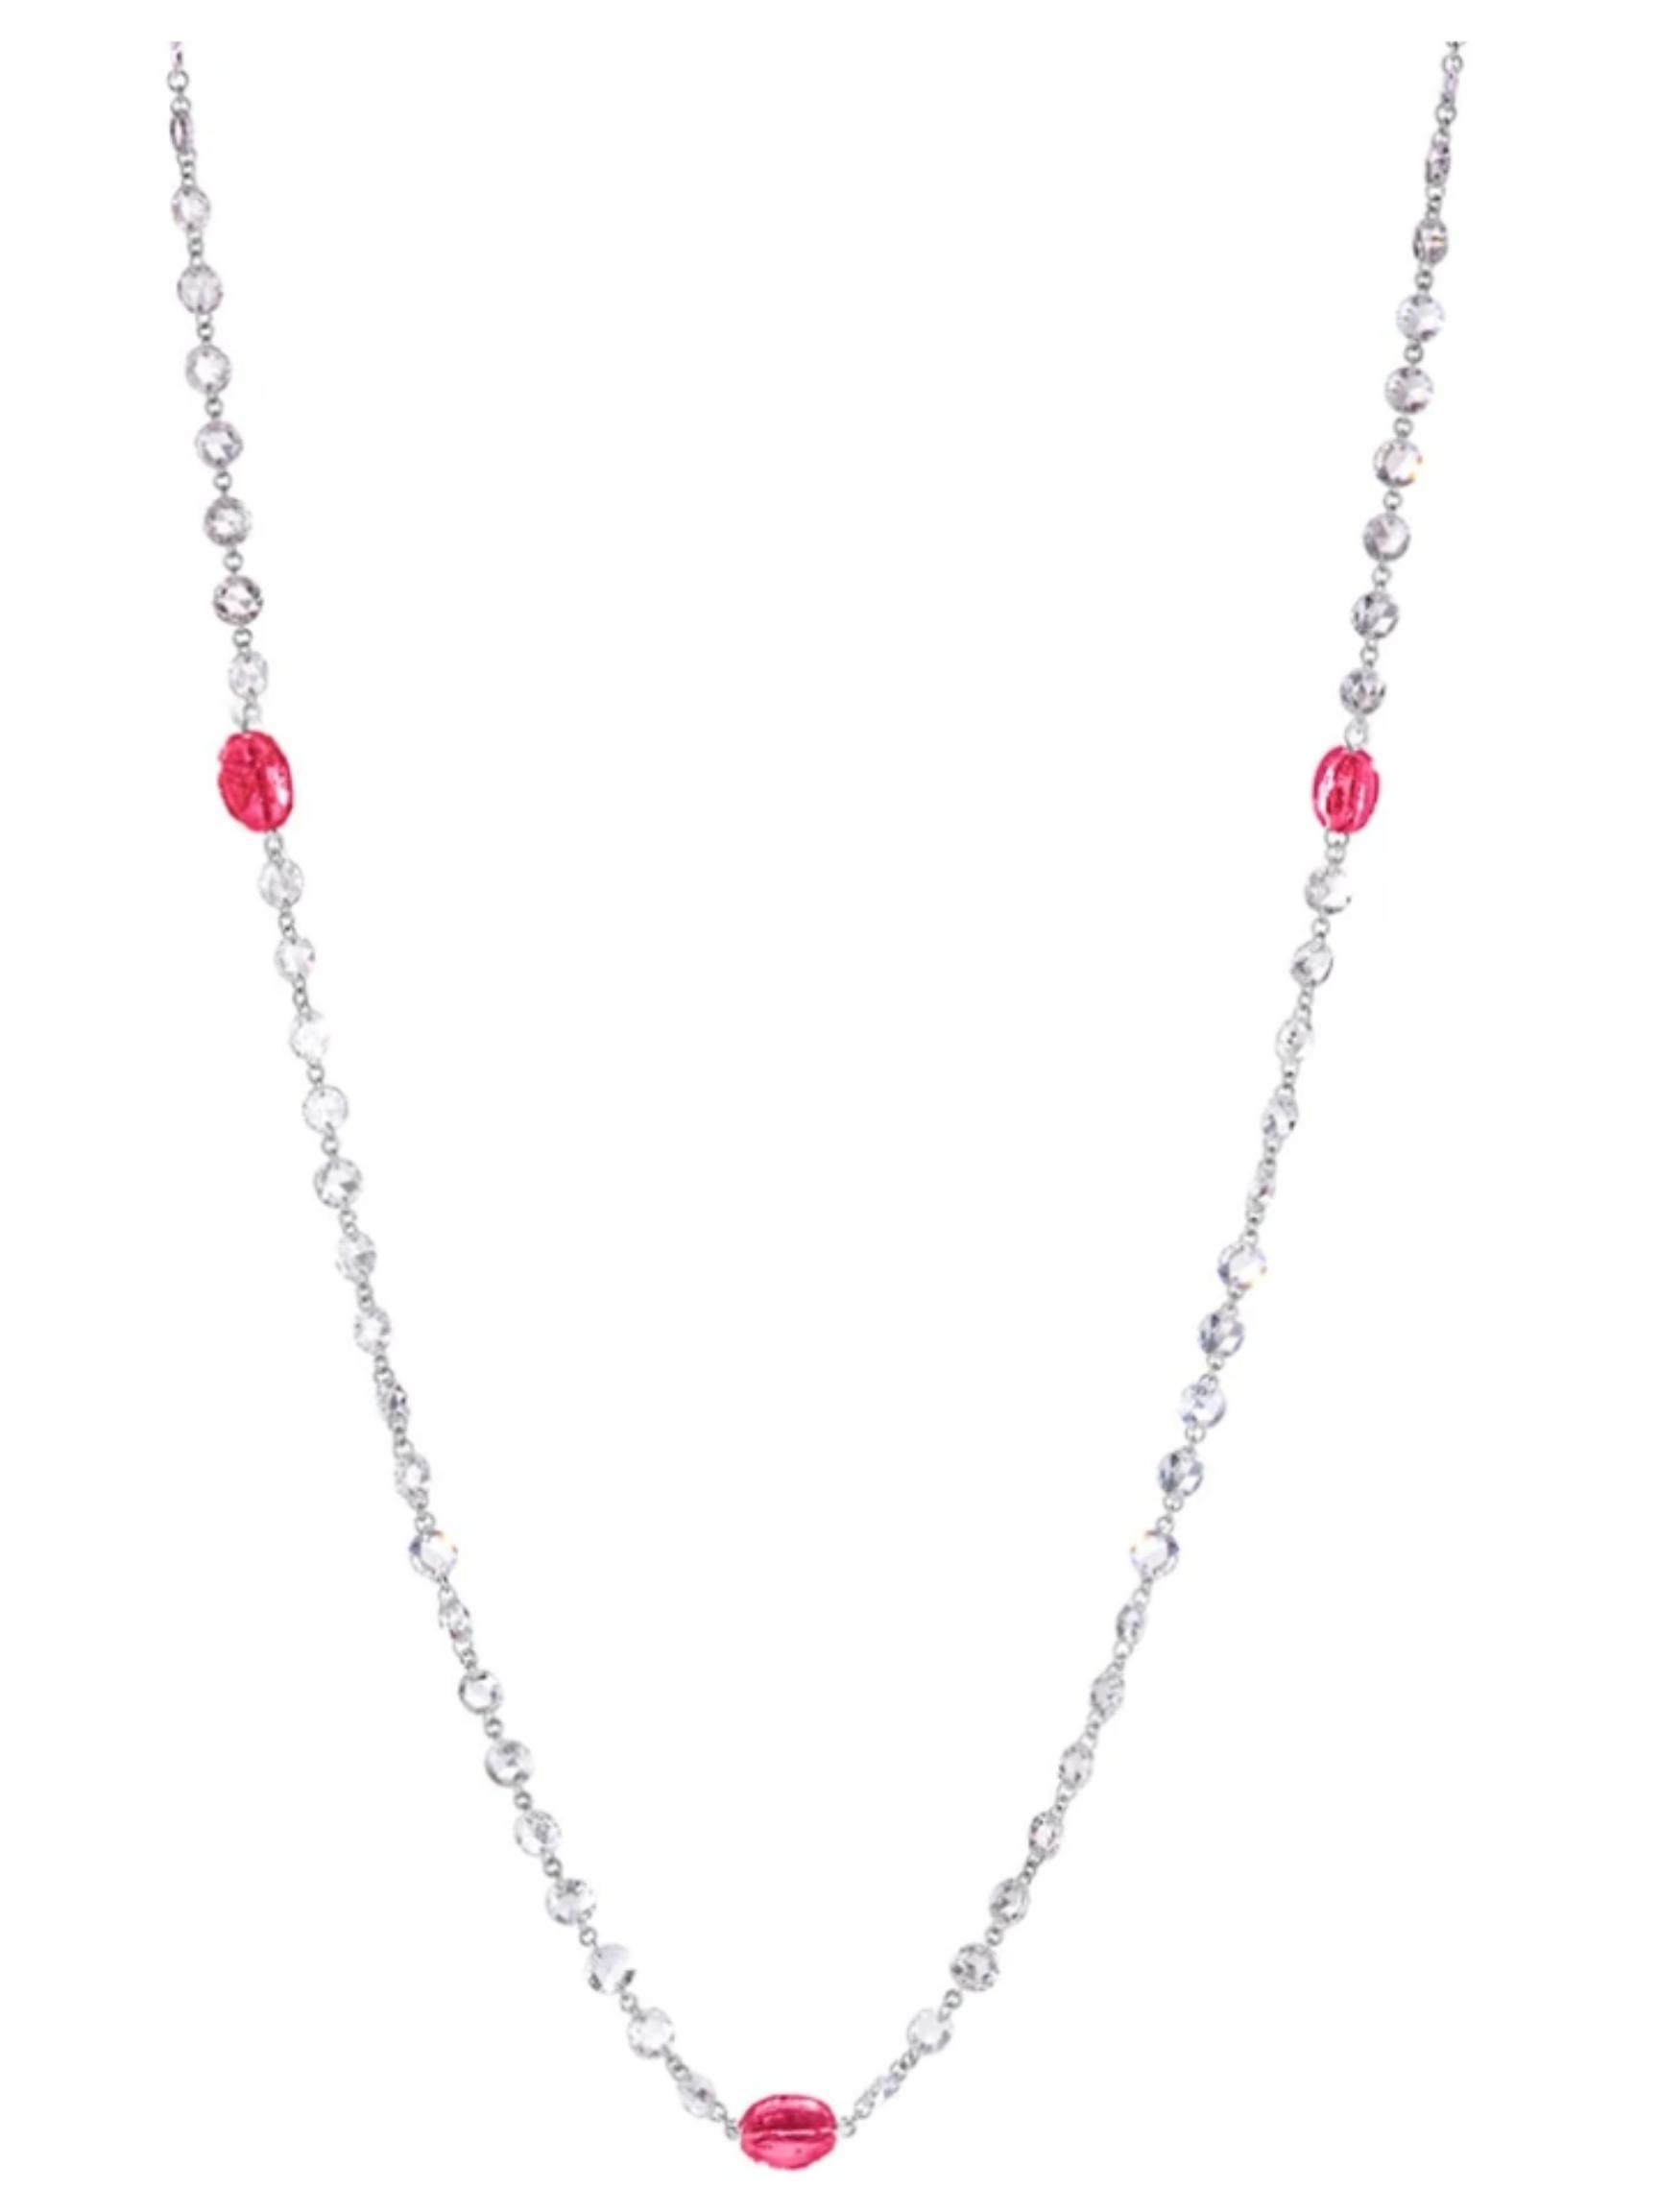 Modern 8.52 Carat Diamond and Ruby Platinum Long Chain Necklace For Sale